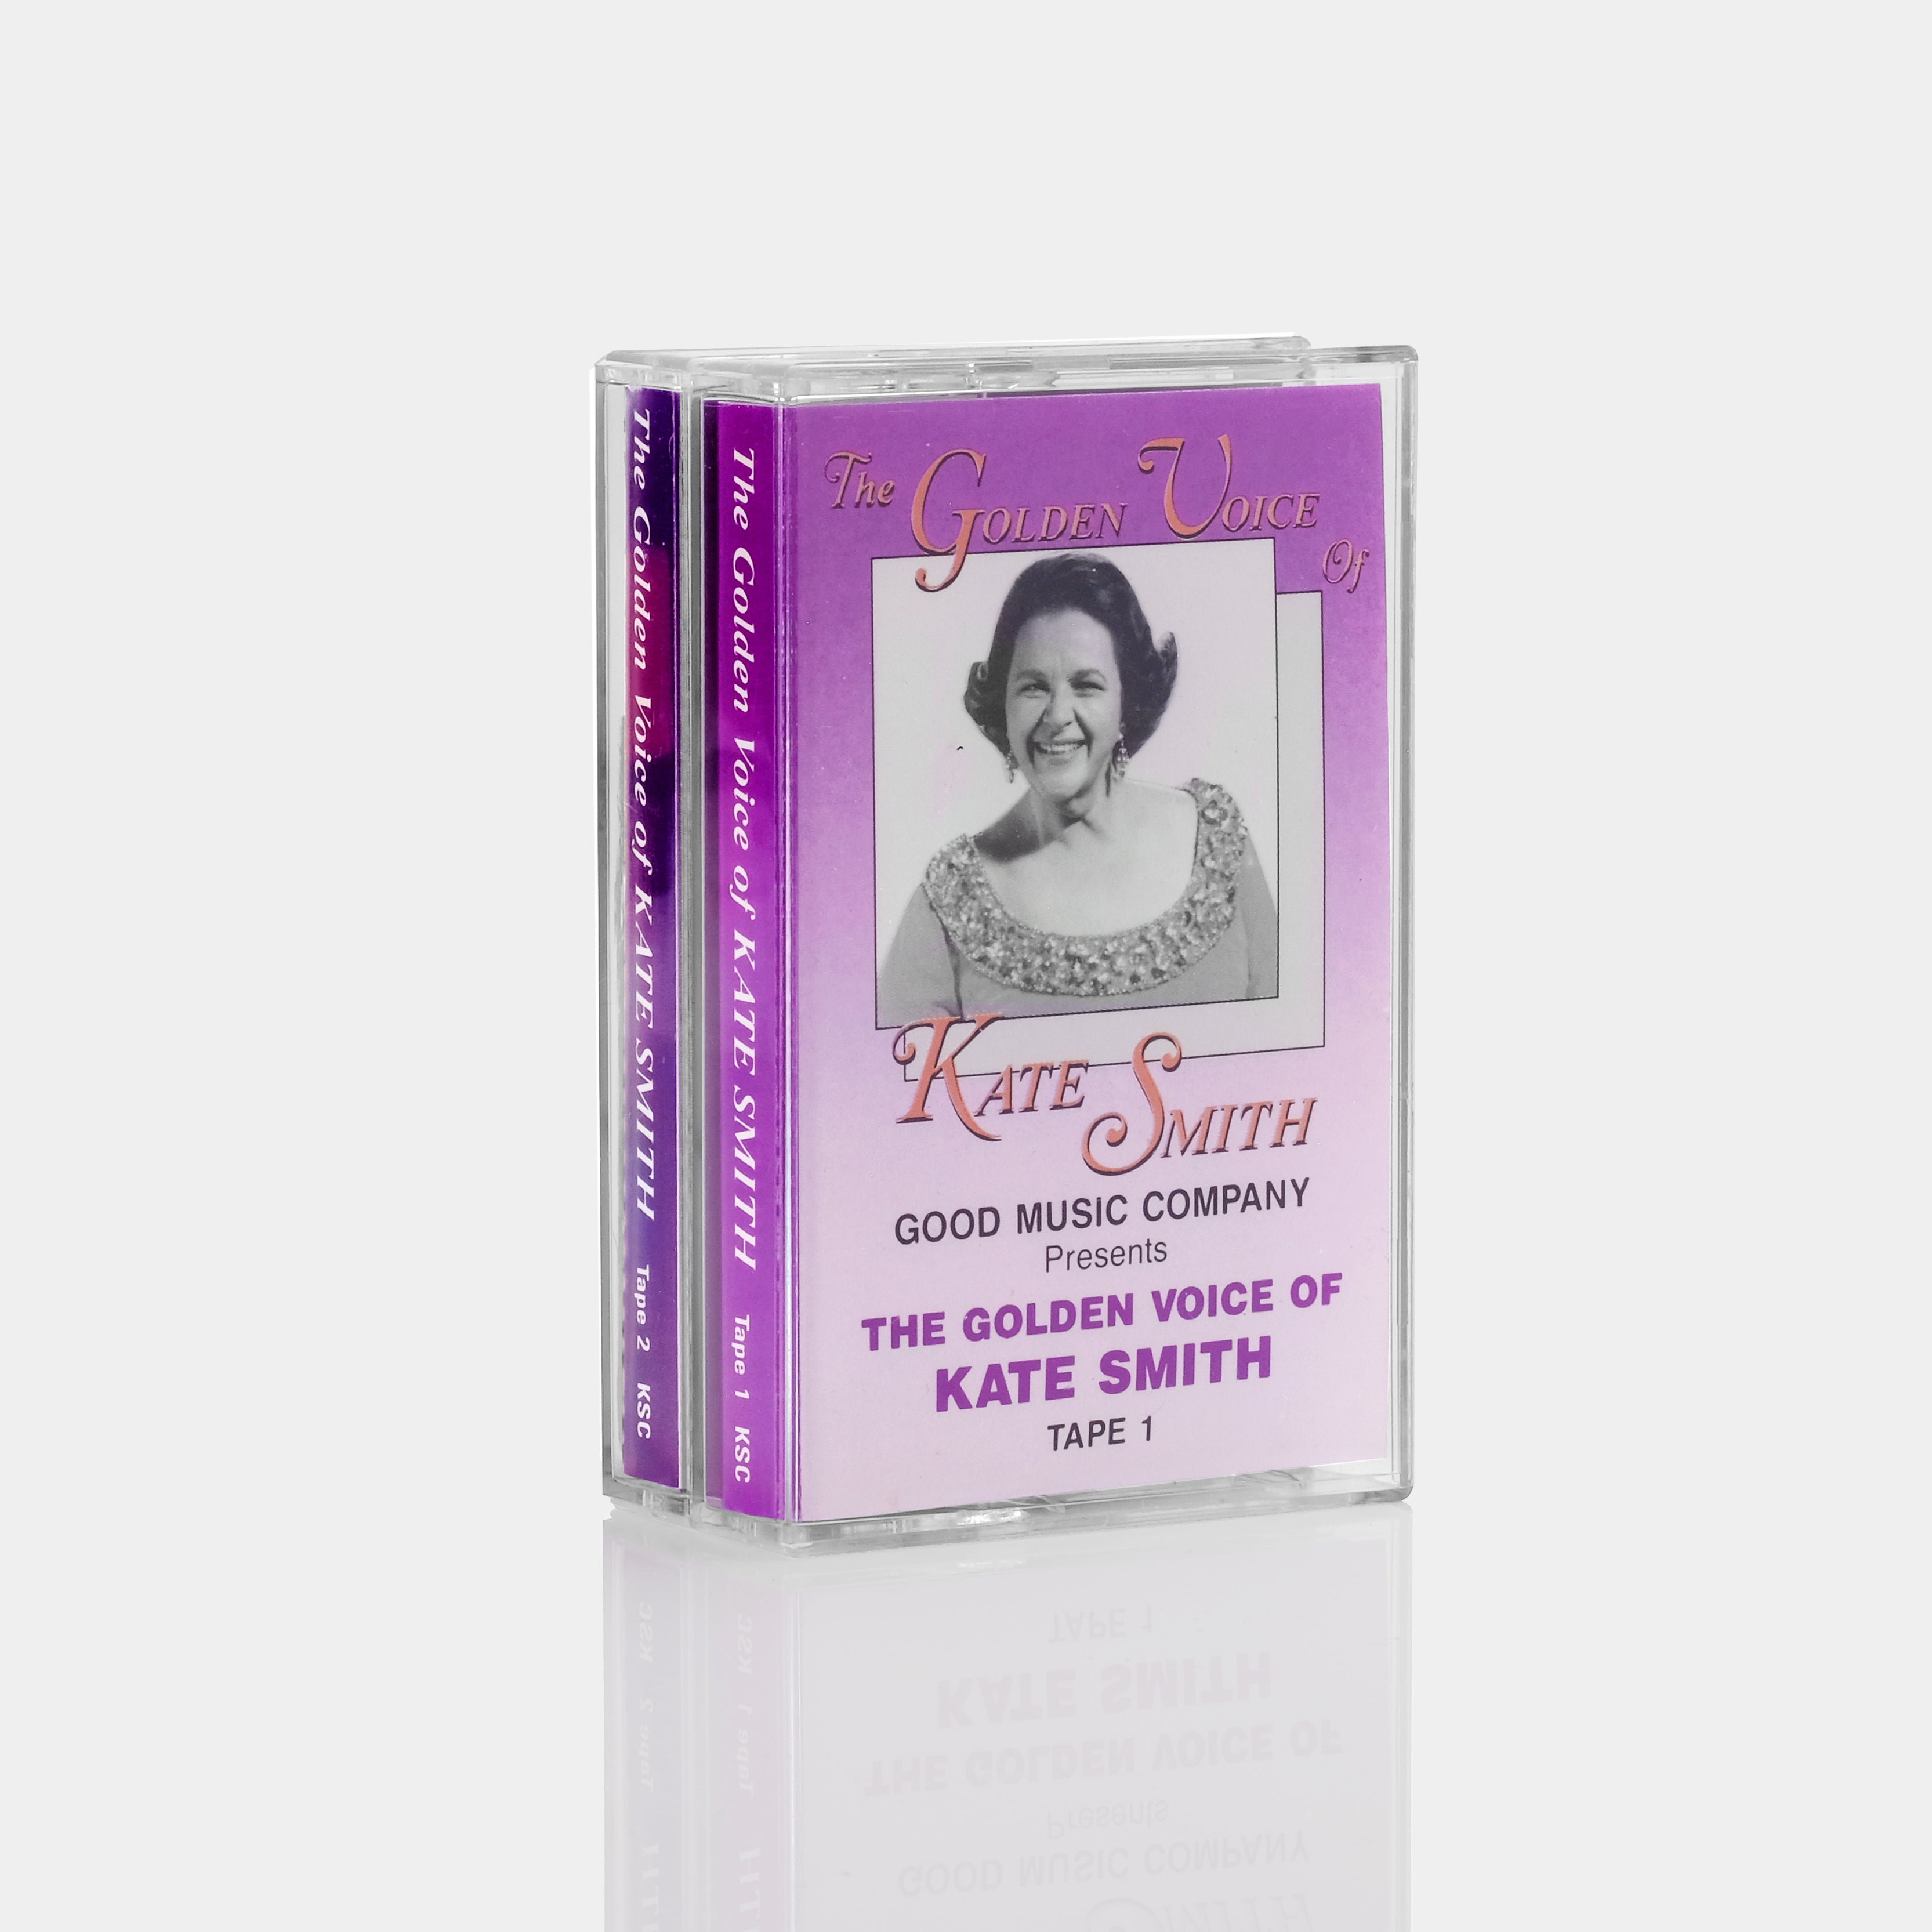 The Golden Voice Of Kate Smith Cassette Tapes 1 & 2